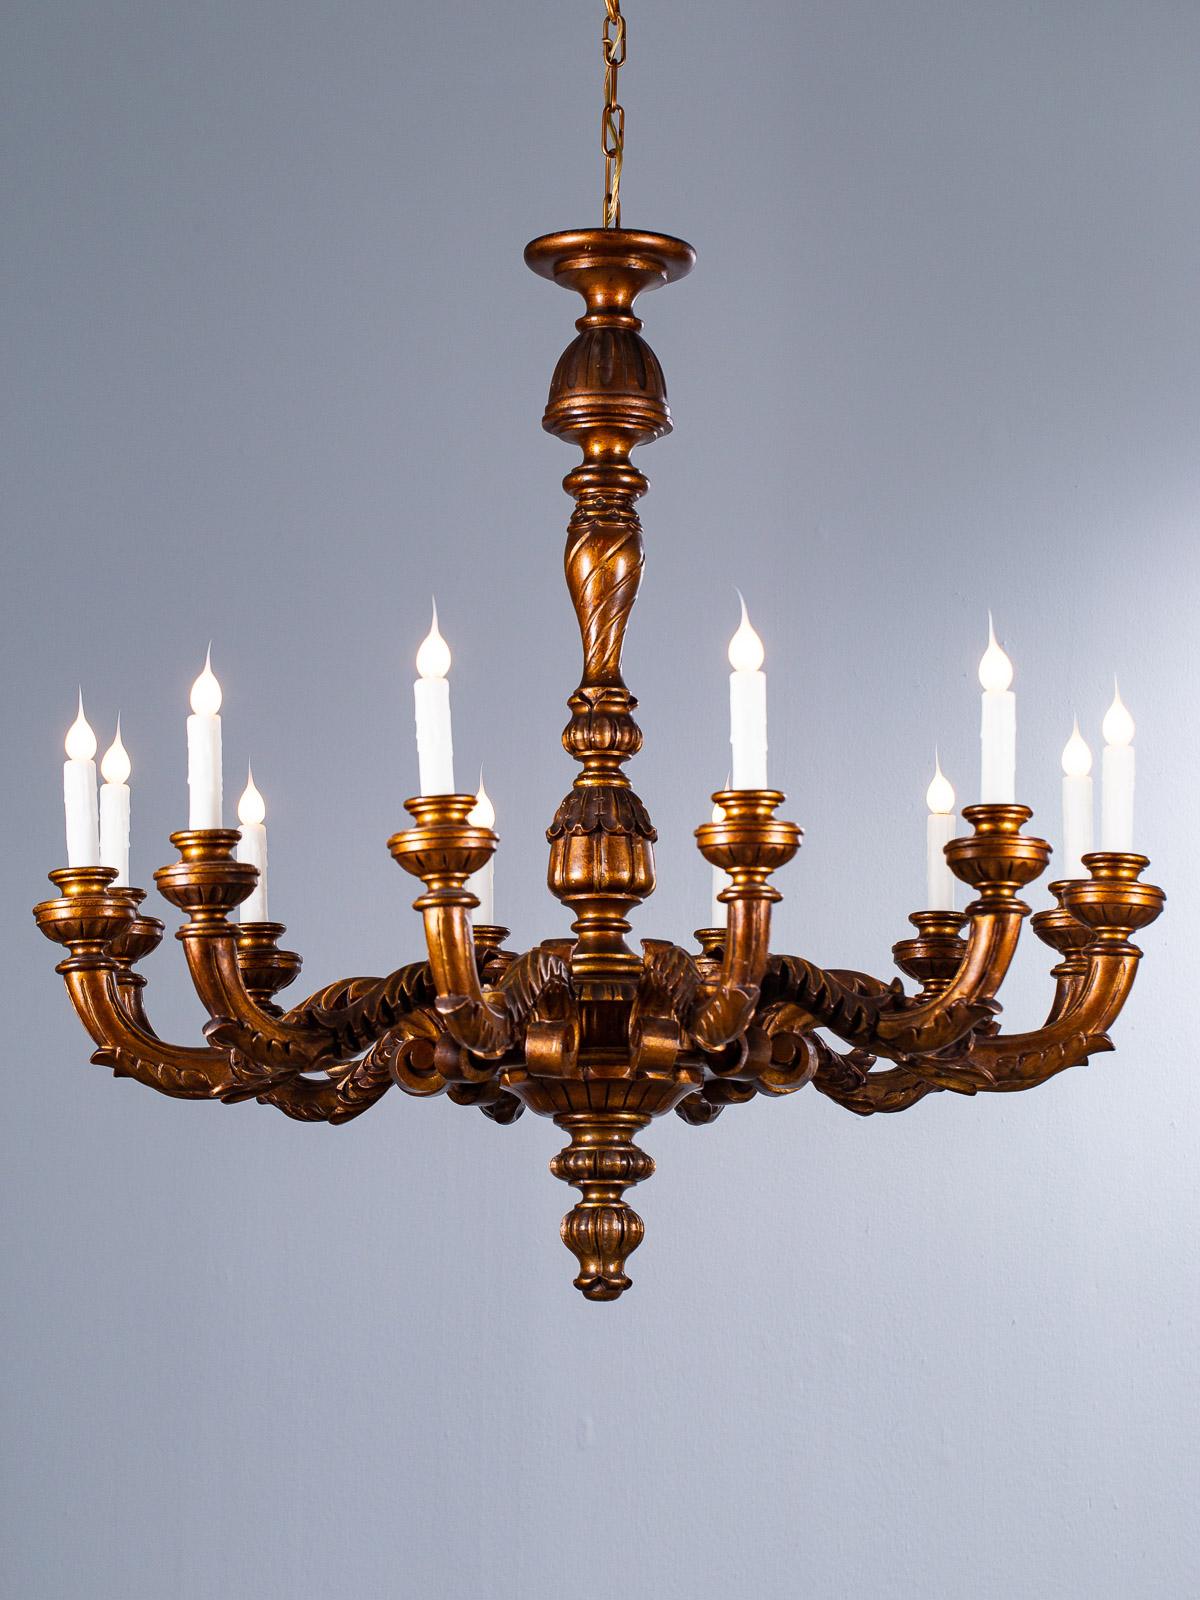 A massive vintage Italian giltwood chandelier circa 1920 having twelve arms. This enormous Italian lighting fixture casts a broad and impressive impression when seen in an interior. The symmetry and balance is perfectly beautiful while the depth of